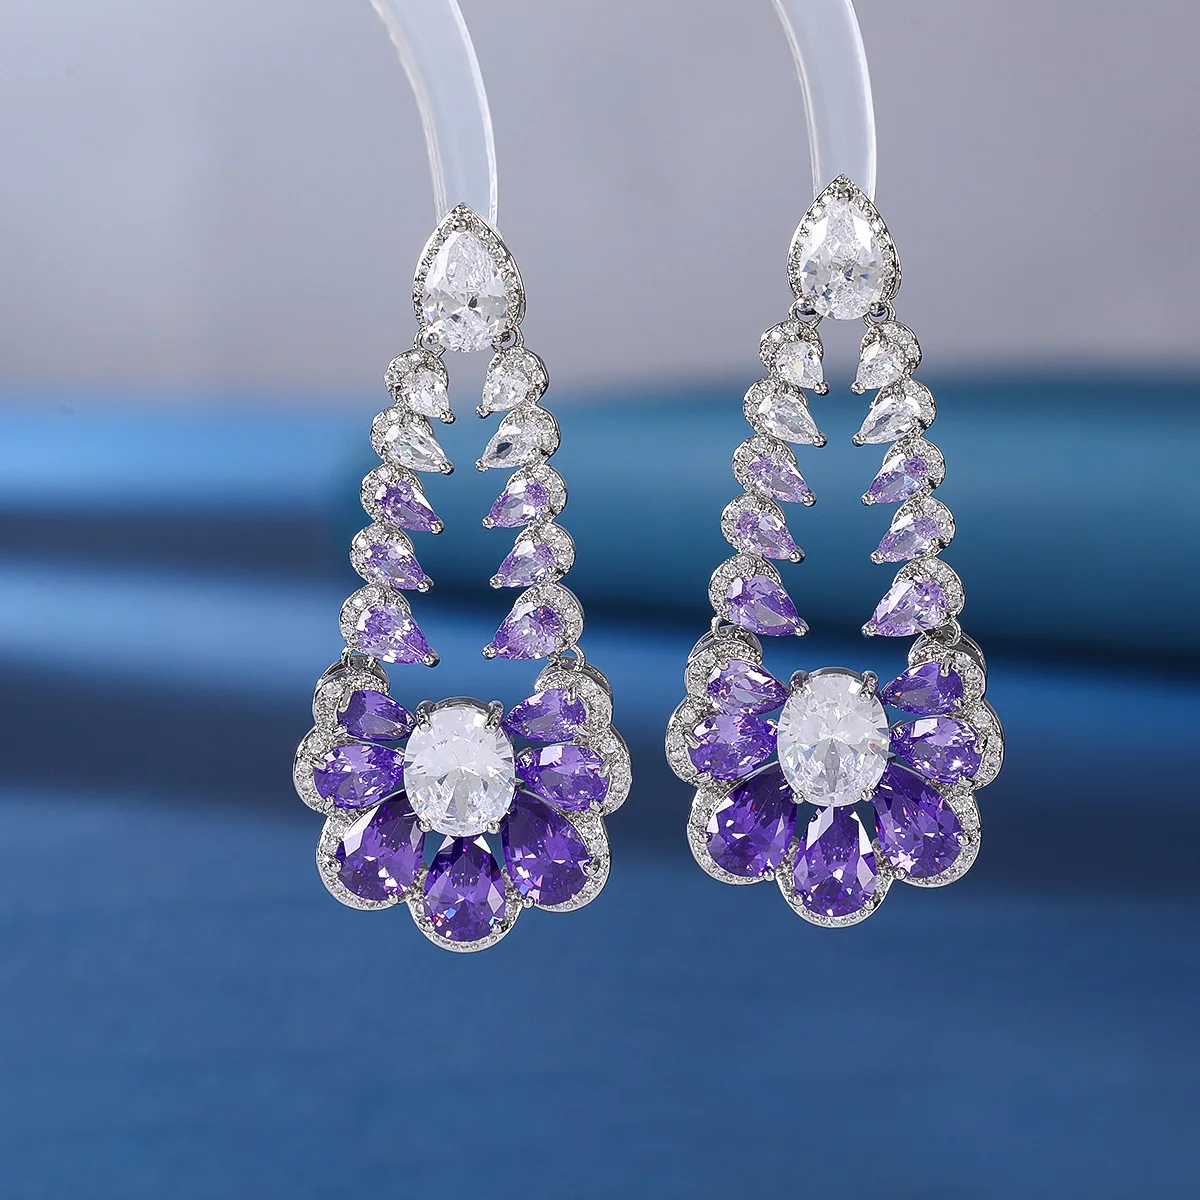 

Bilincolor Luxury Floral Small Fresh Purple Zircon Drop Shaped Geometric Earrings for Wedding or Party